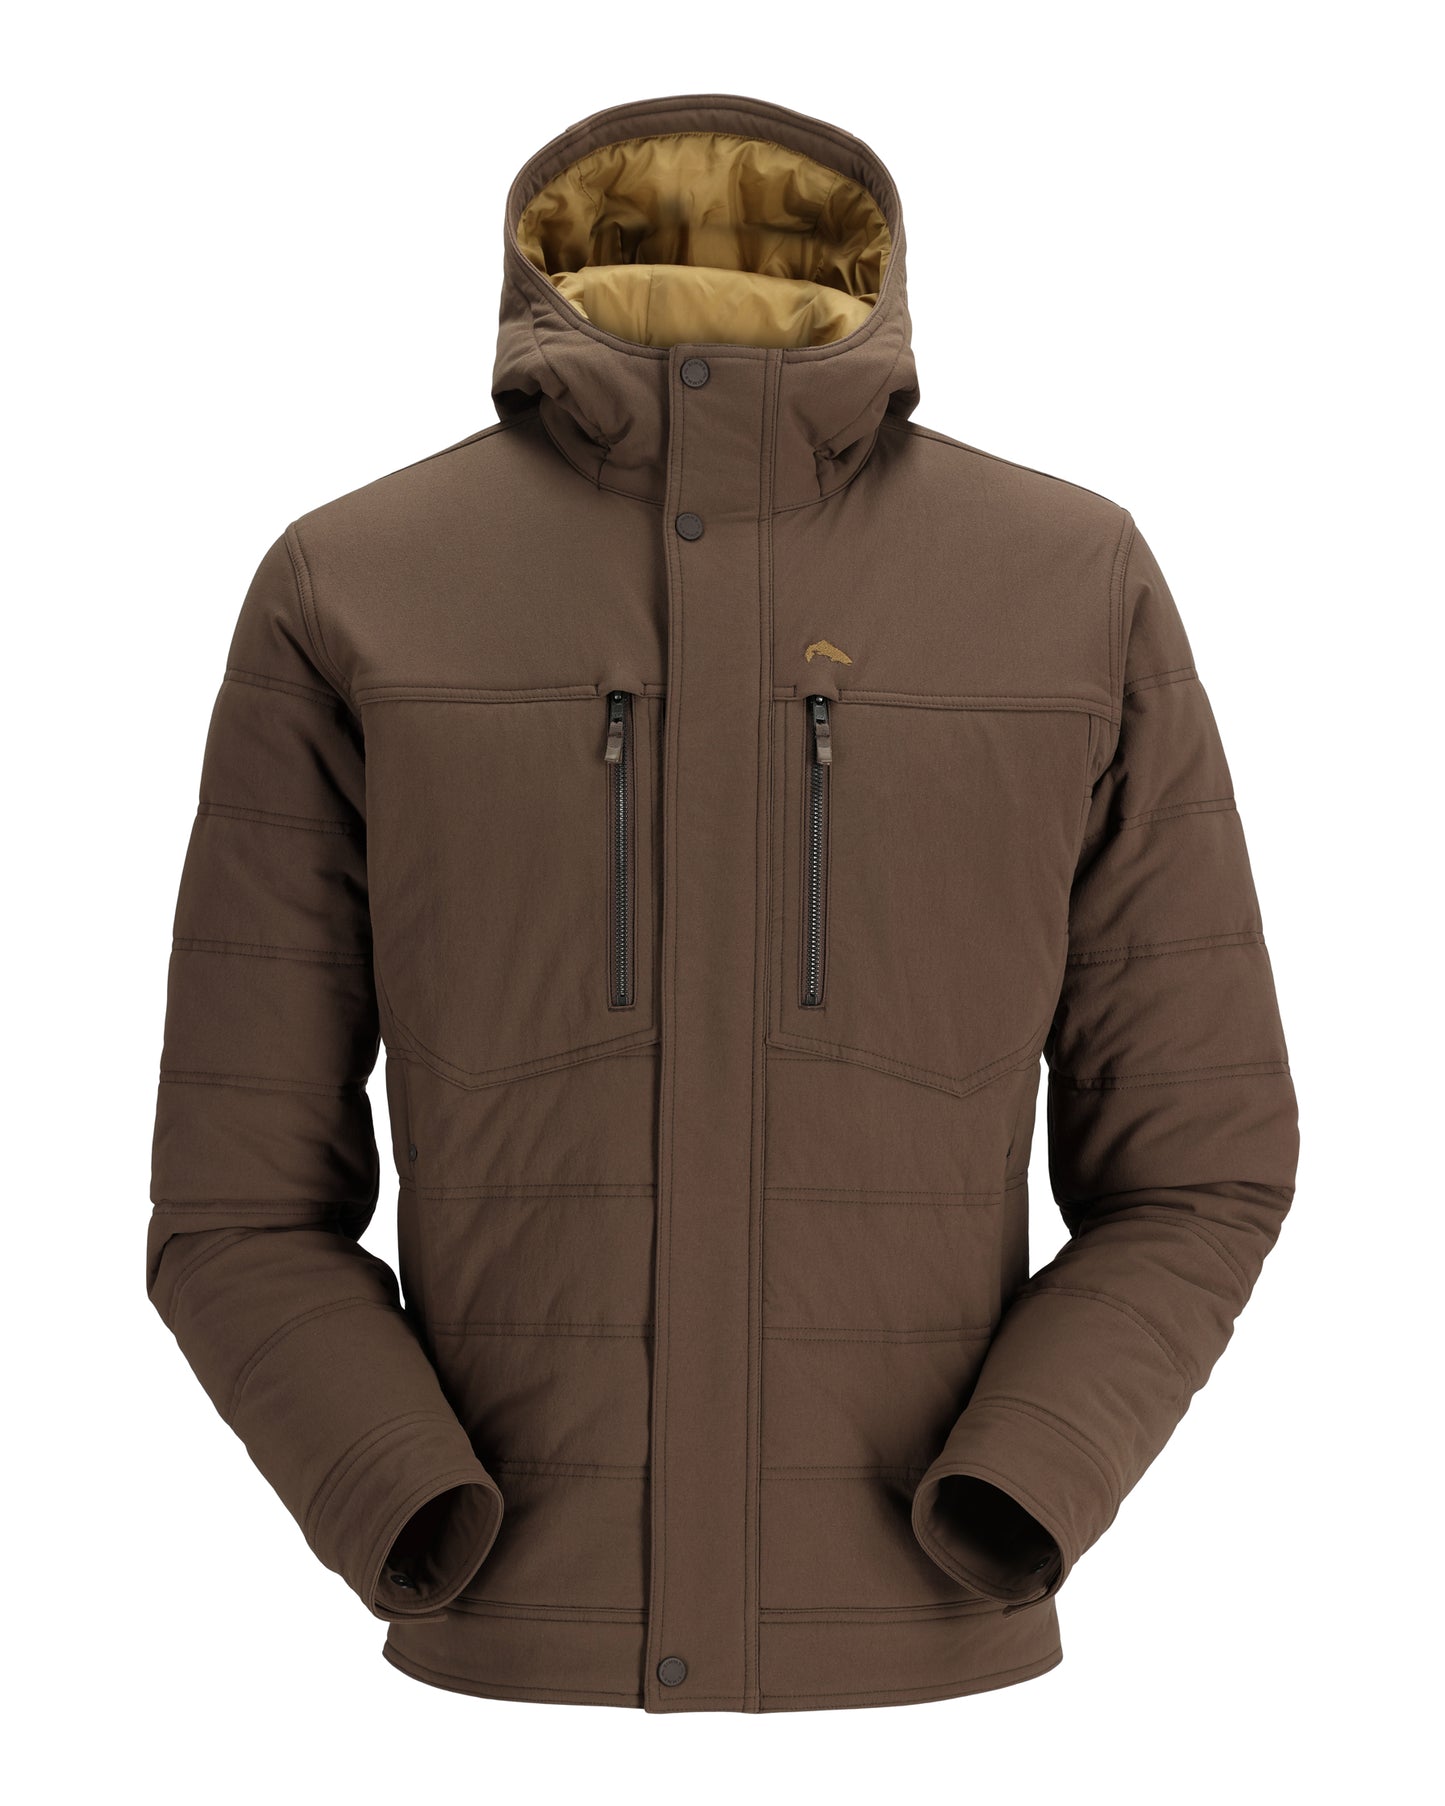 13599-216-cardwell-hooded-jacket-mannequin